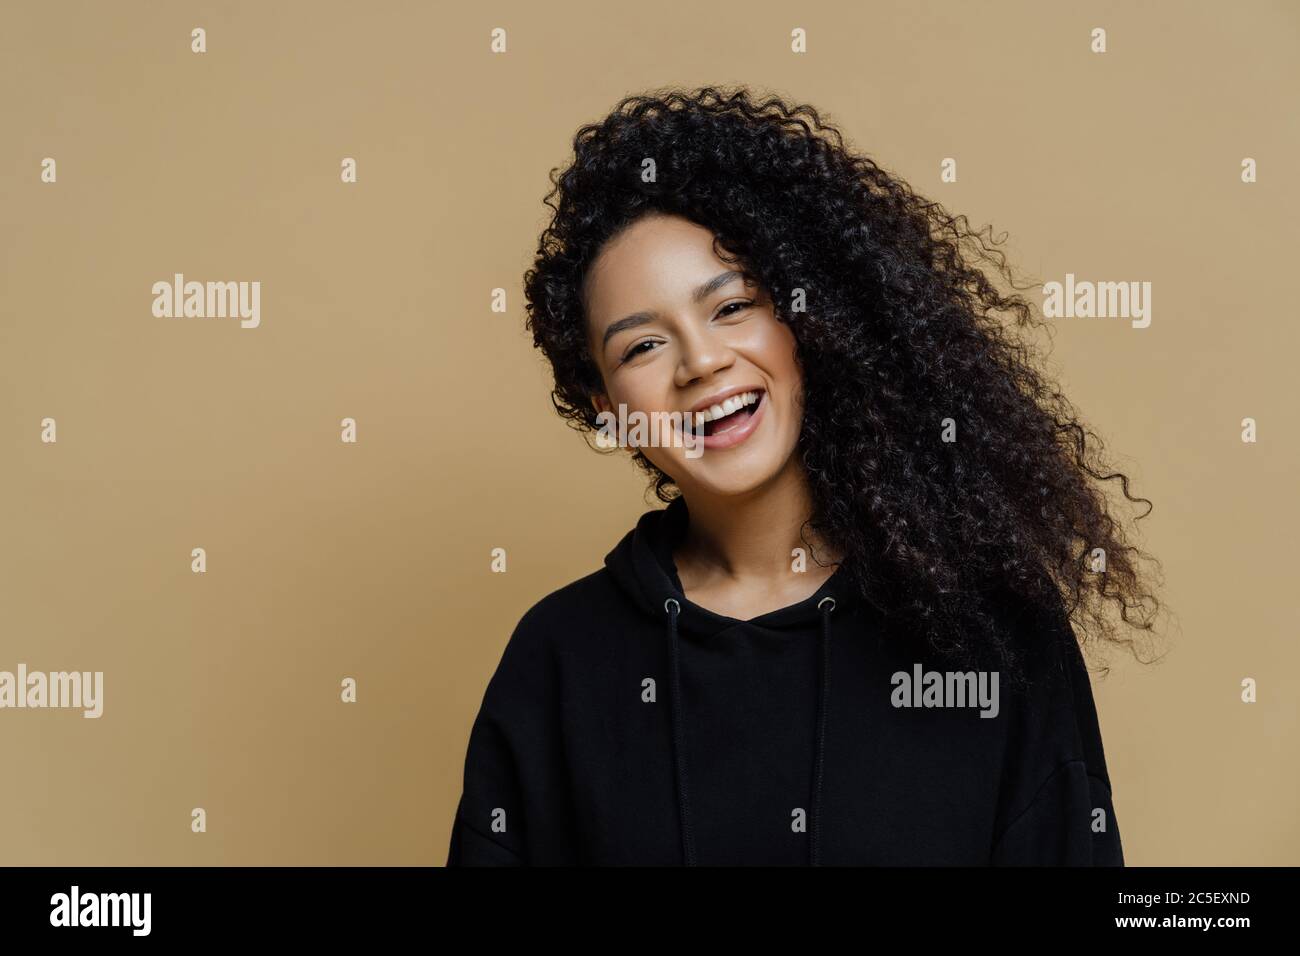 Happy positive African American woman with curly hair, tilts head and smiles broadly, dressed in casual black sweatshirt, isolated on beige background Stock Photo